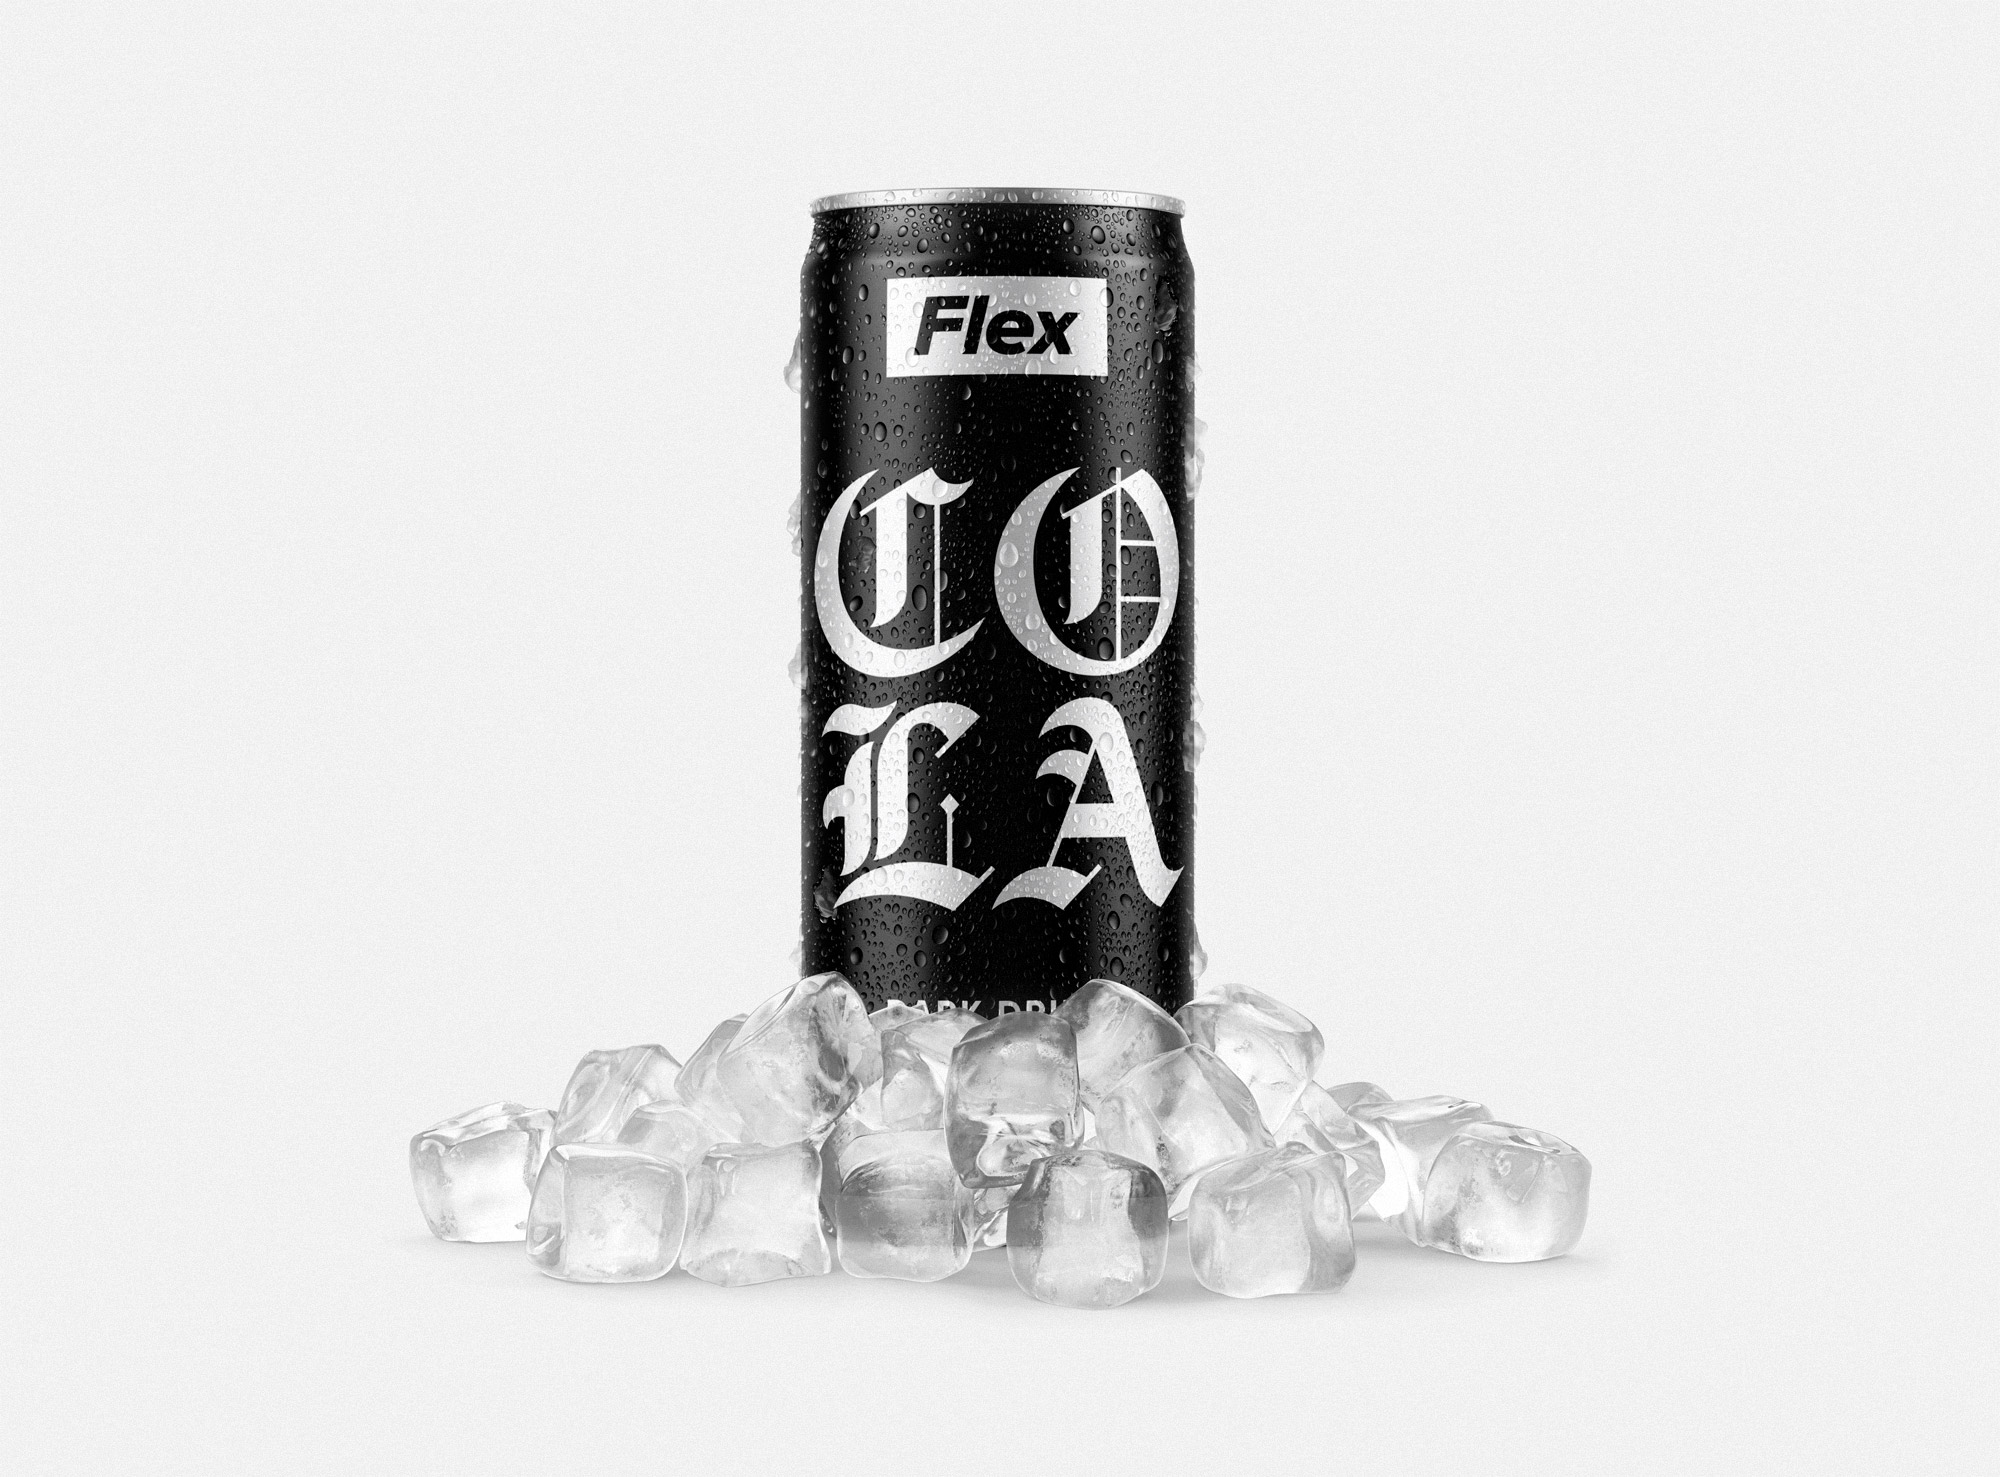 Lesha Limonov and Eugene Wisotow Create Packaging Design for Flex Cola Carbonated Soft Drink